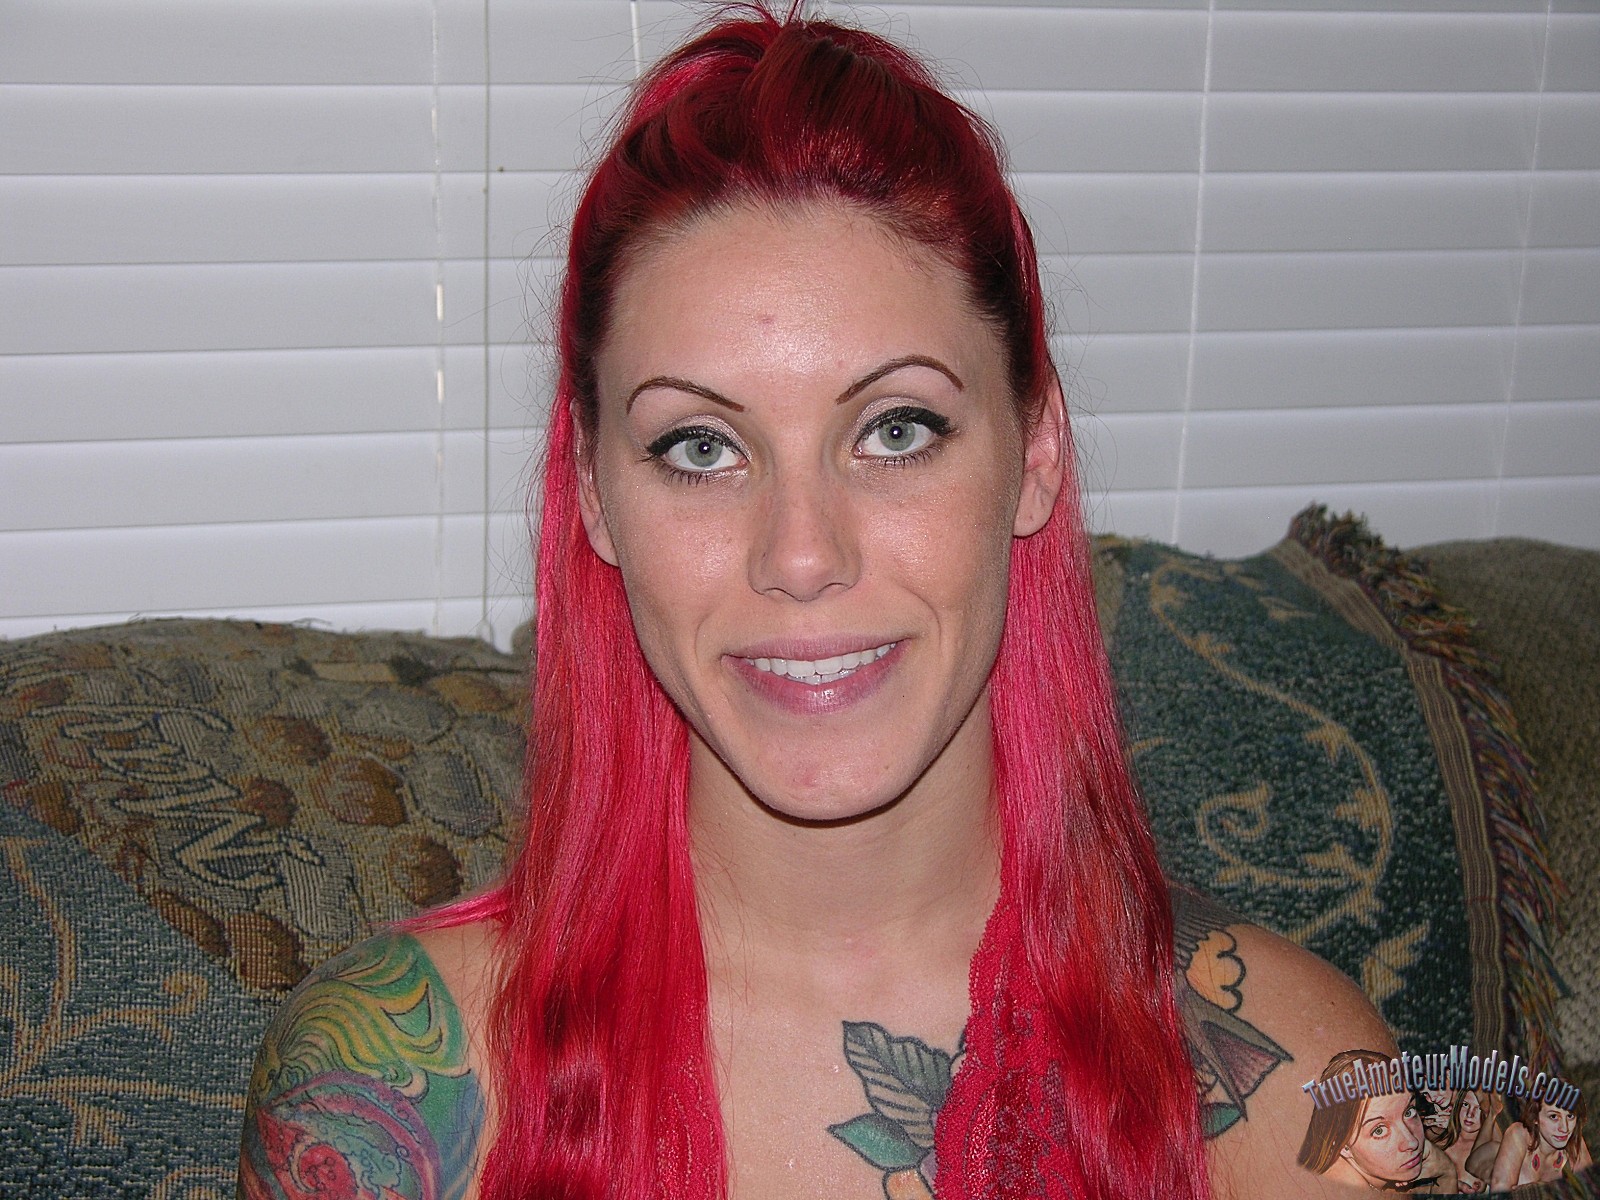 Tattooed Amateur With Red Hair Spreads Her Ass 40480 Hot Sex Picture